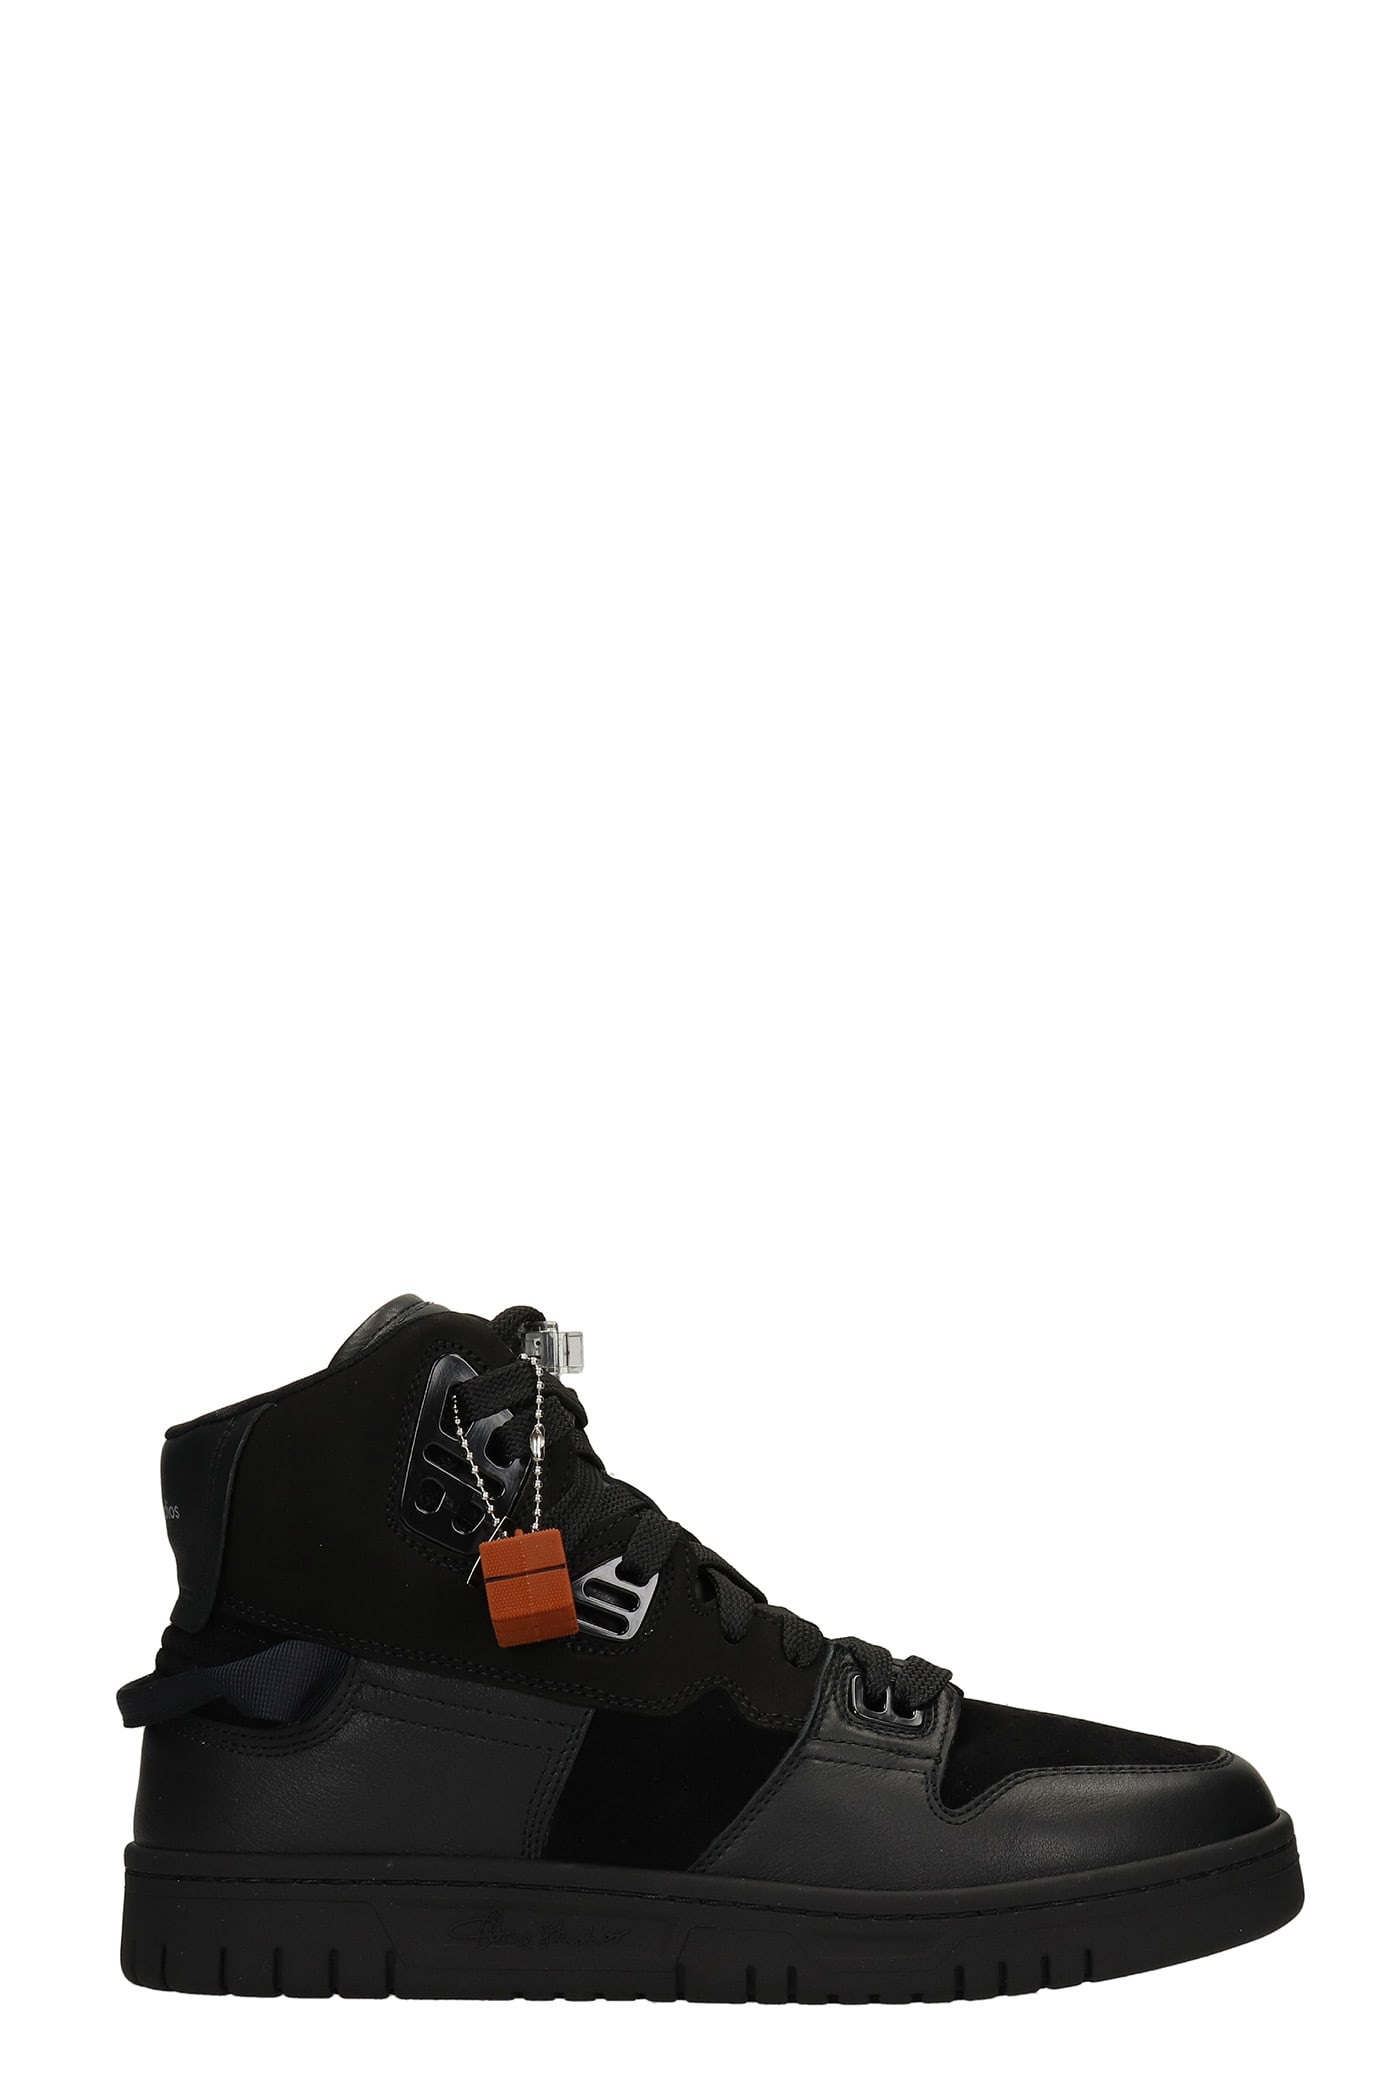 Acne Studios Sthmc High Mix Sneakers In Black Suede And Leather